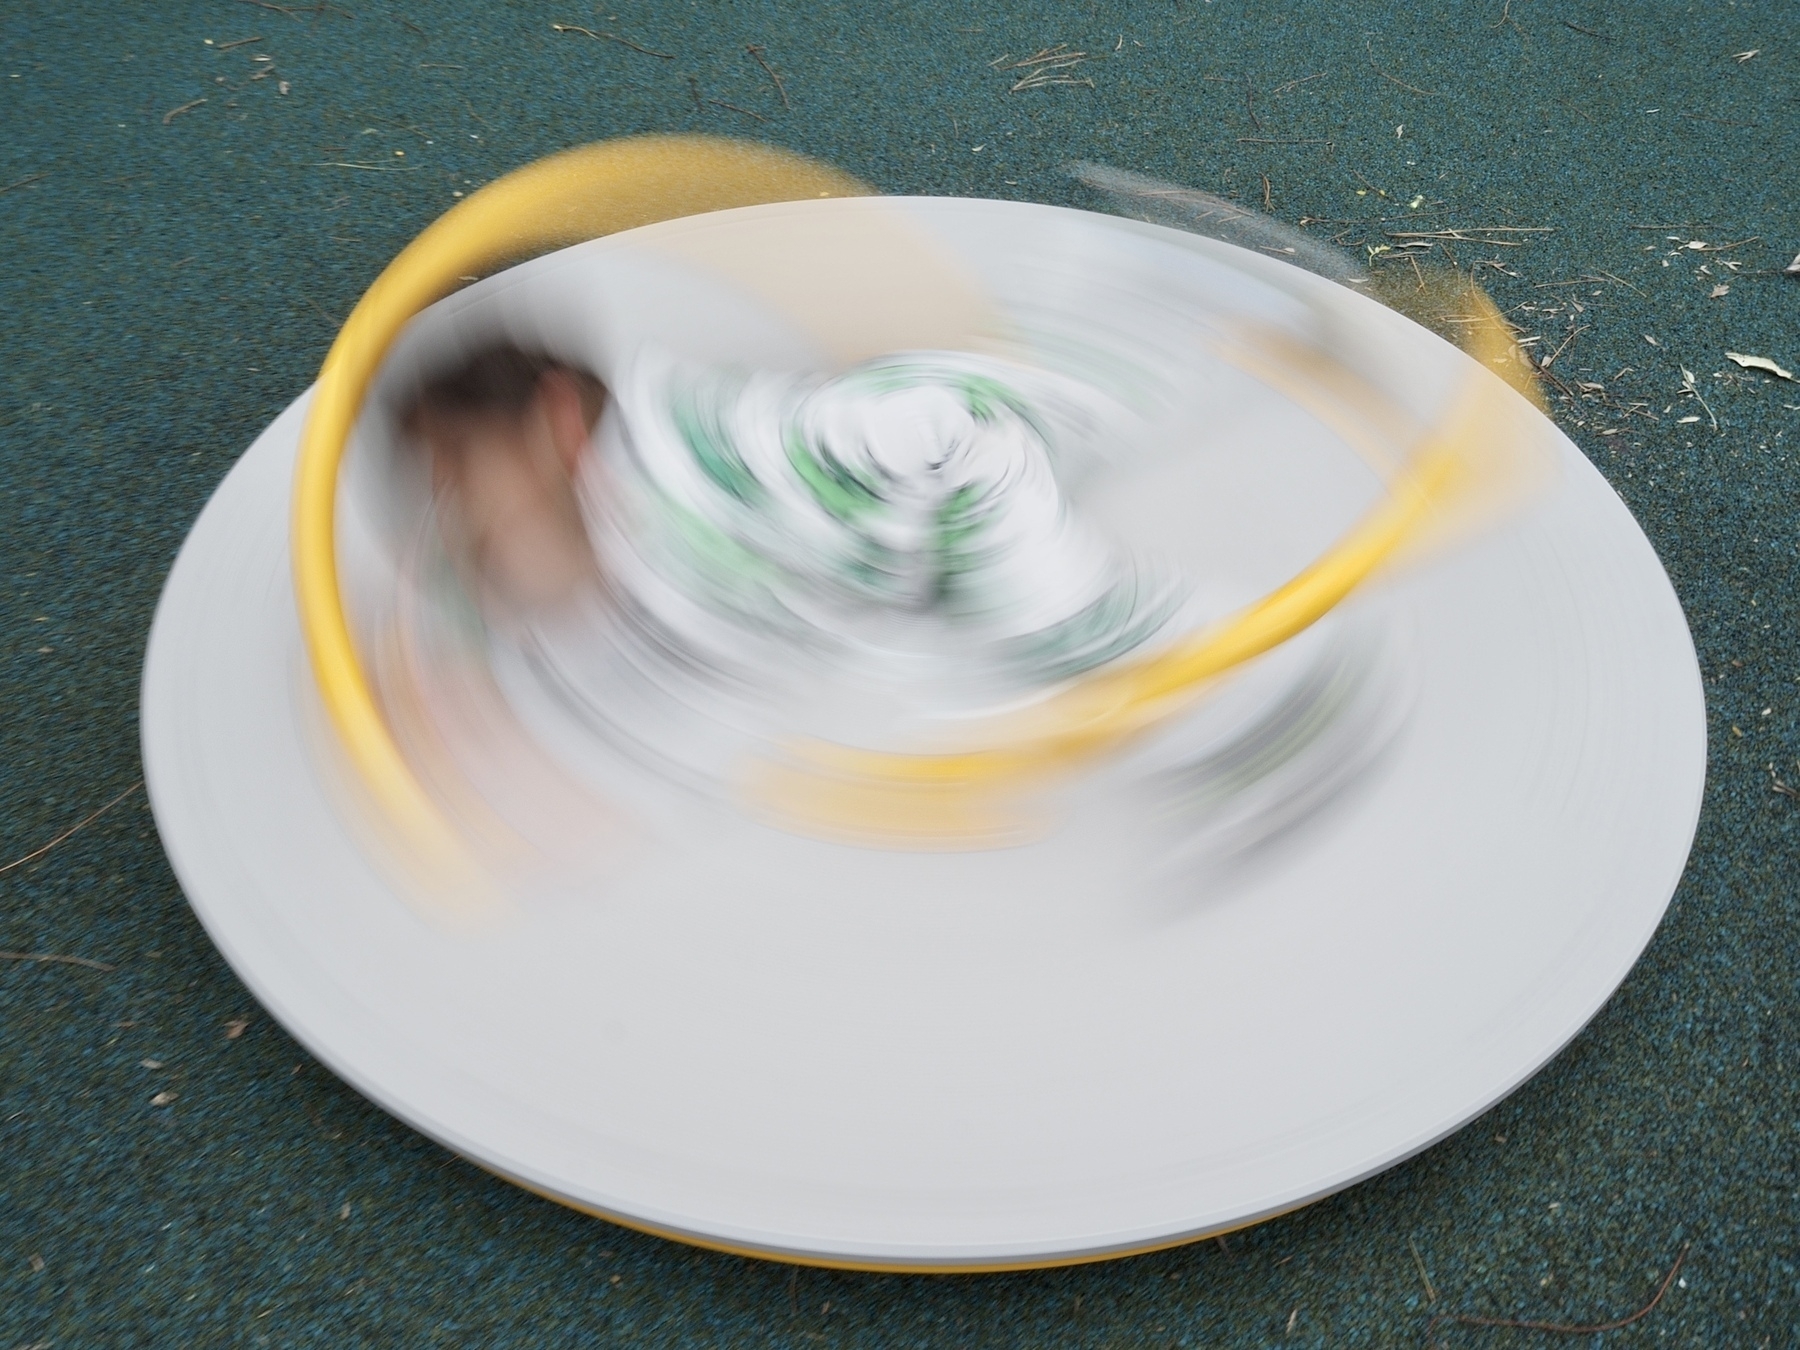 A long-exposure shot of a kid spinning on a piece of playground equipment